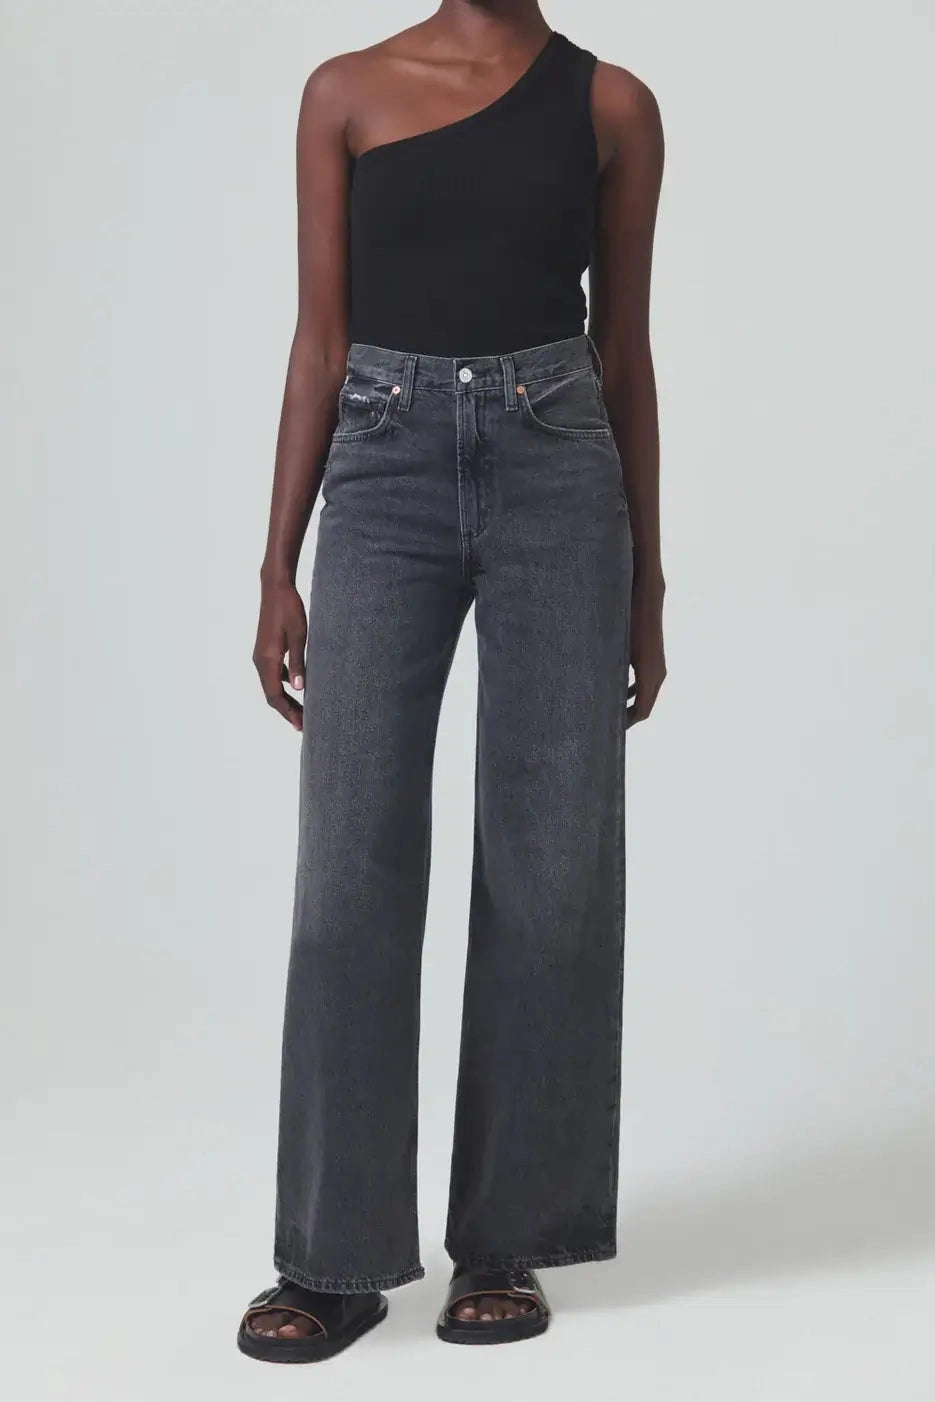 CITIZENS OF HUMANITY PALOMA BAGGY JEANS IN BEVERLY BROOK